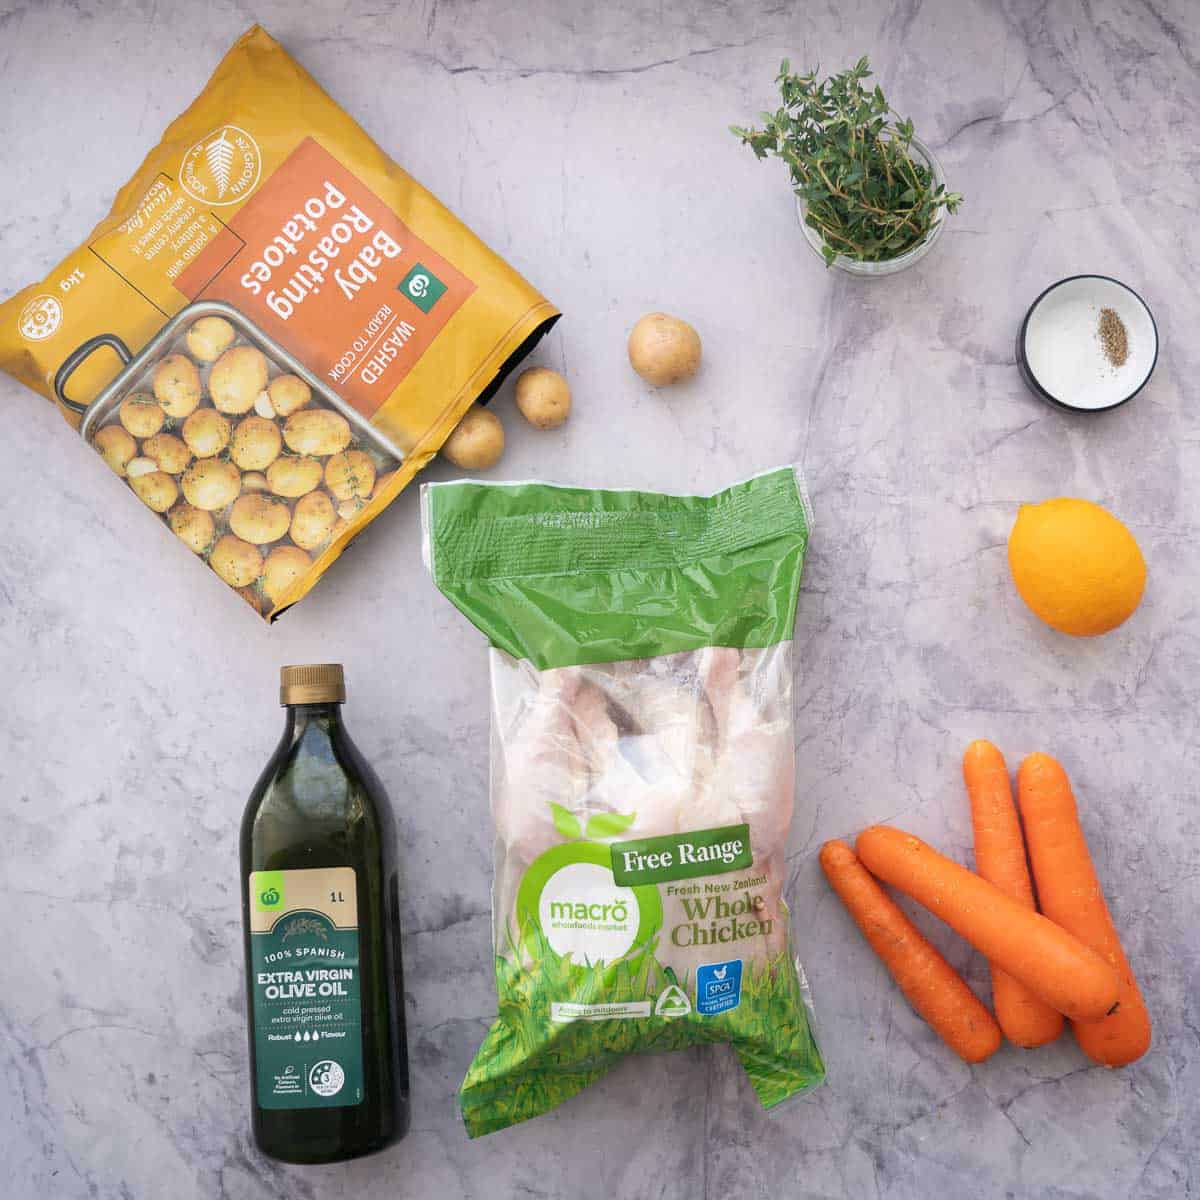 All the ingredients laid out on the bench to make Crocpot Roasted Chicken - A bottle of olive oil, a bag with a whole raw chicken inside of it. 4 carrots, a lemon and a bag of baby potatoes. 